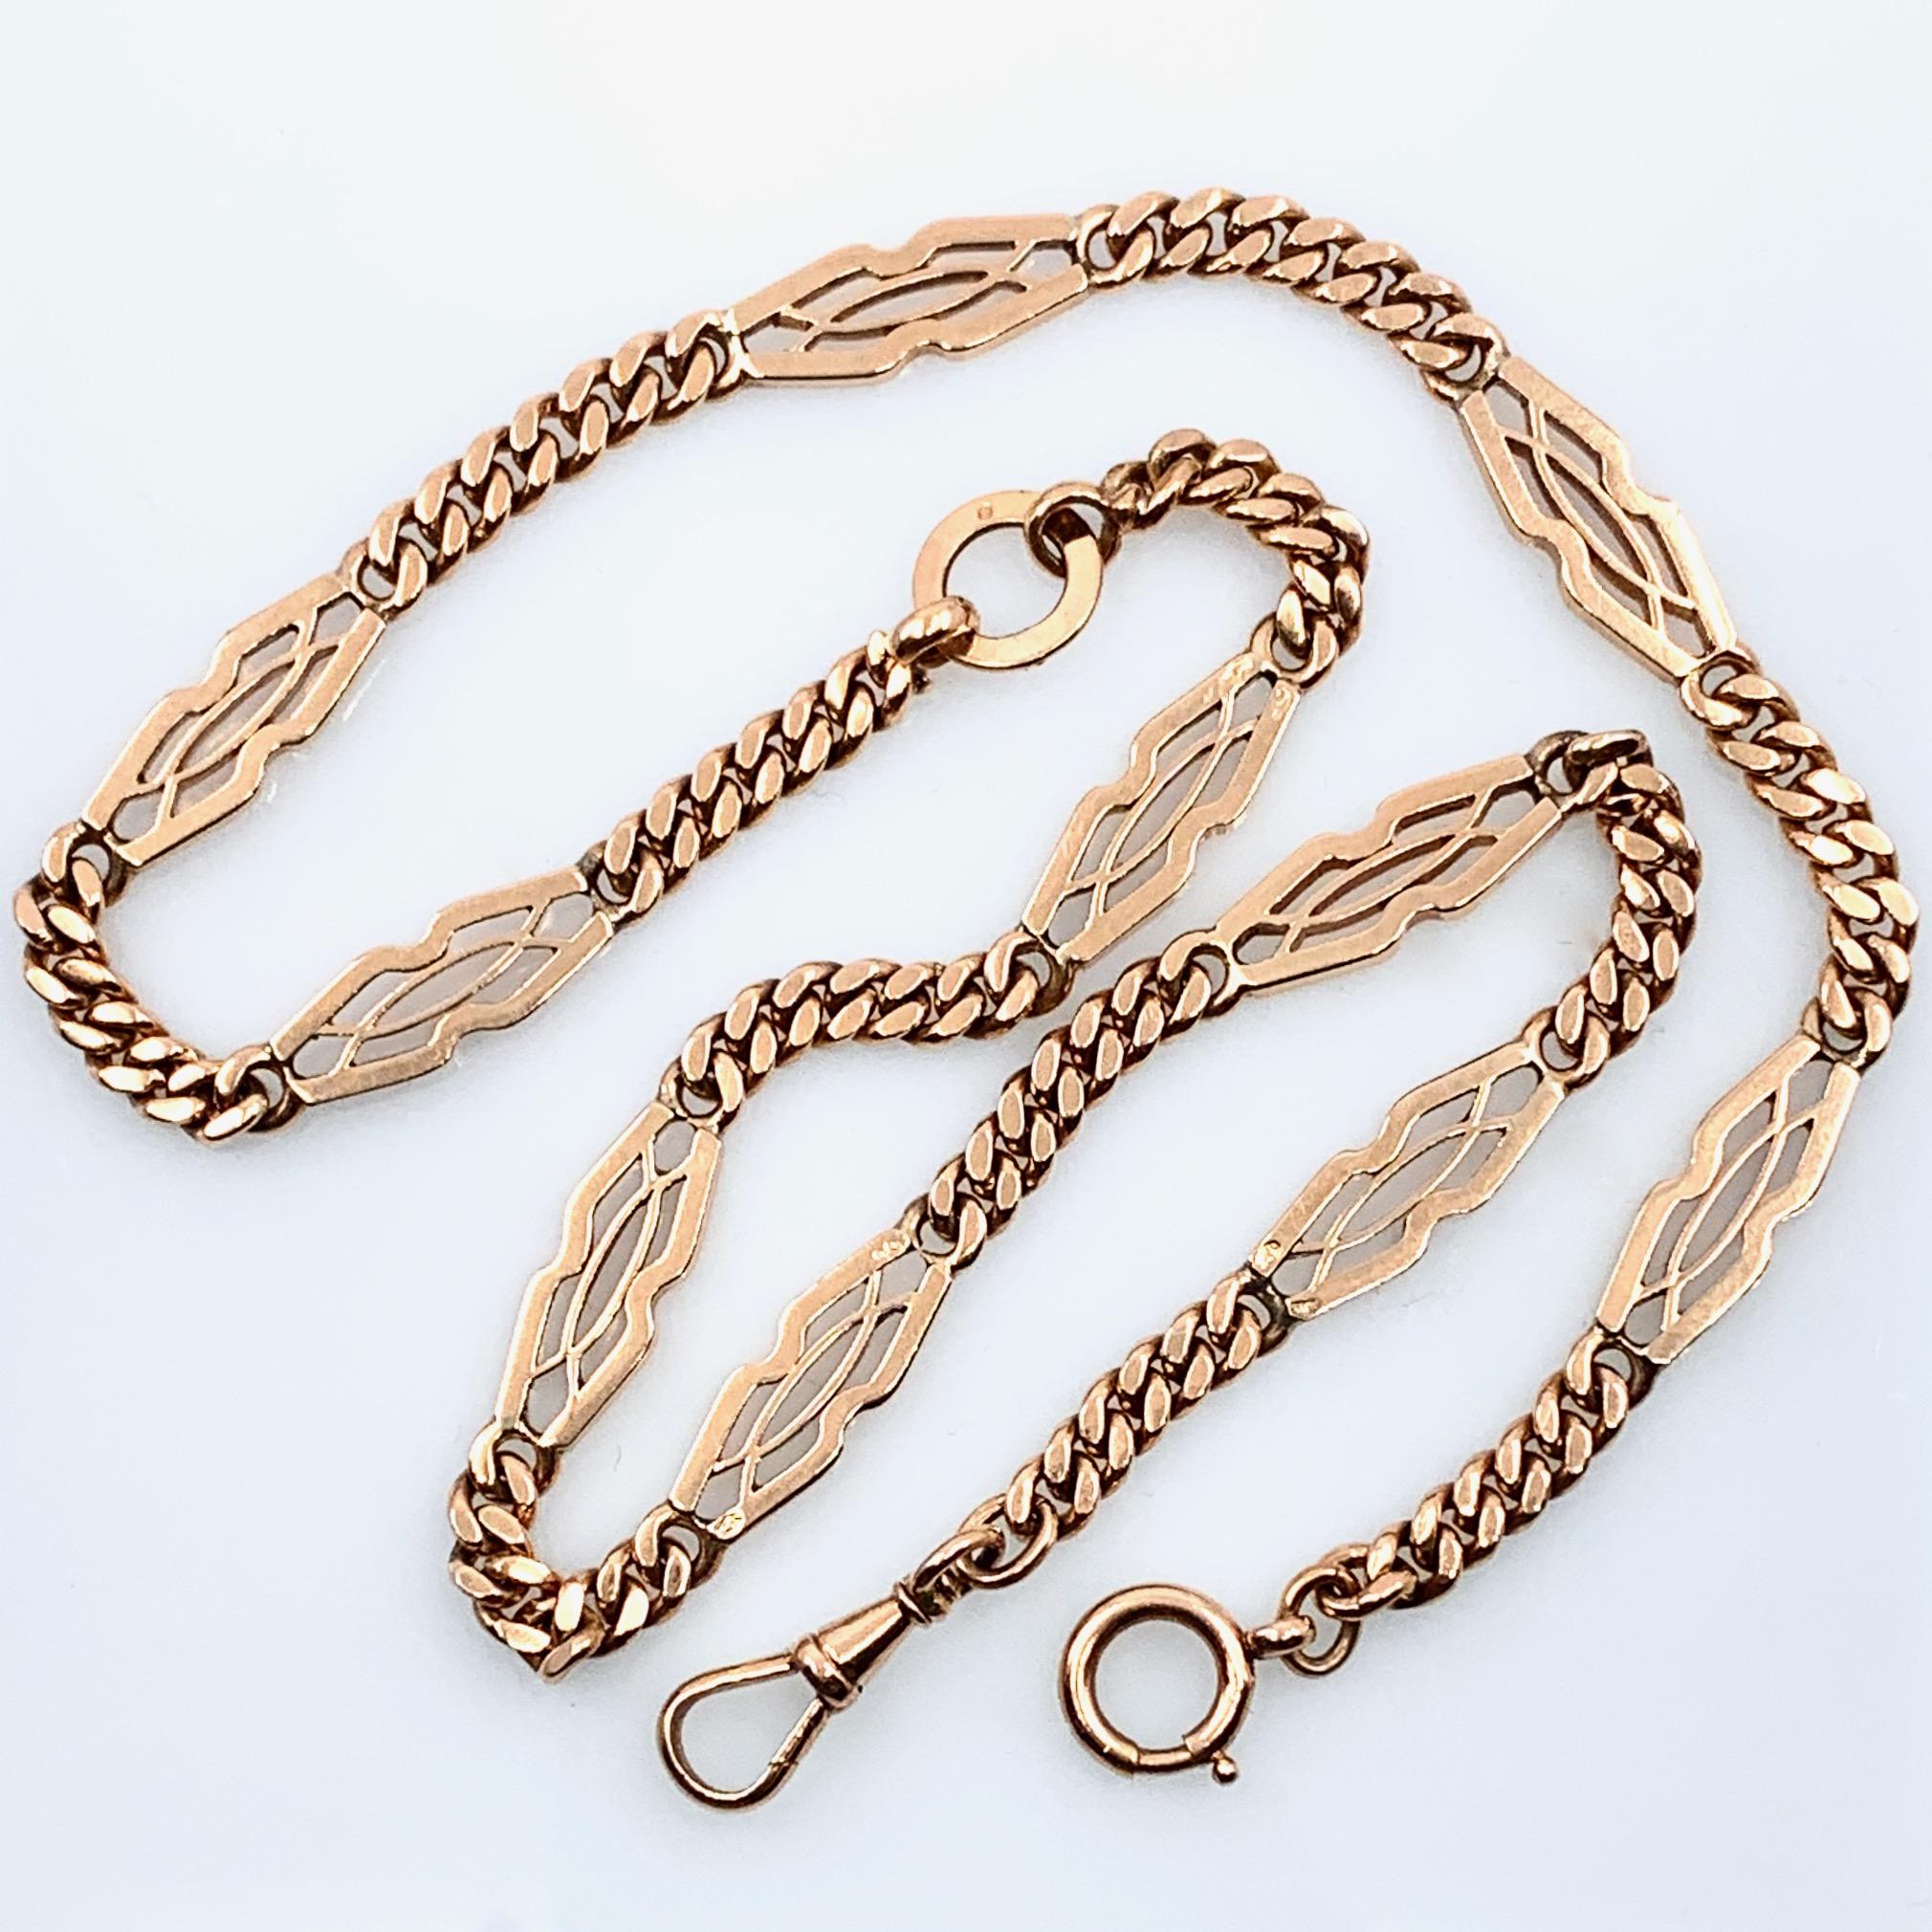 This thick, substantial pocket watch chain was made in Vienna in the late Hapsburg era, sometime between 1872 and 1922.  Oh the things this chain has seen...  

The fetter links alternate with six tight curb links and terminate with a bolt clip at